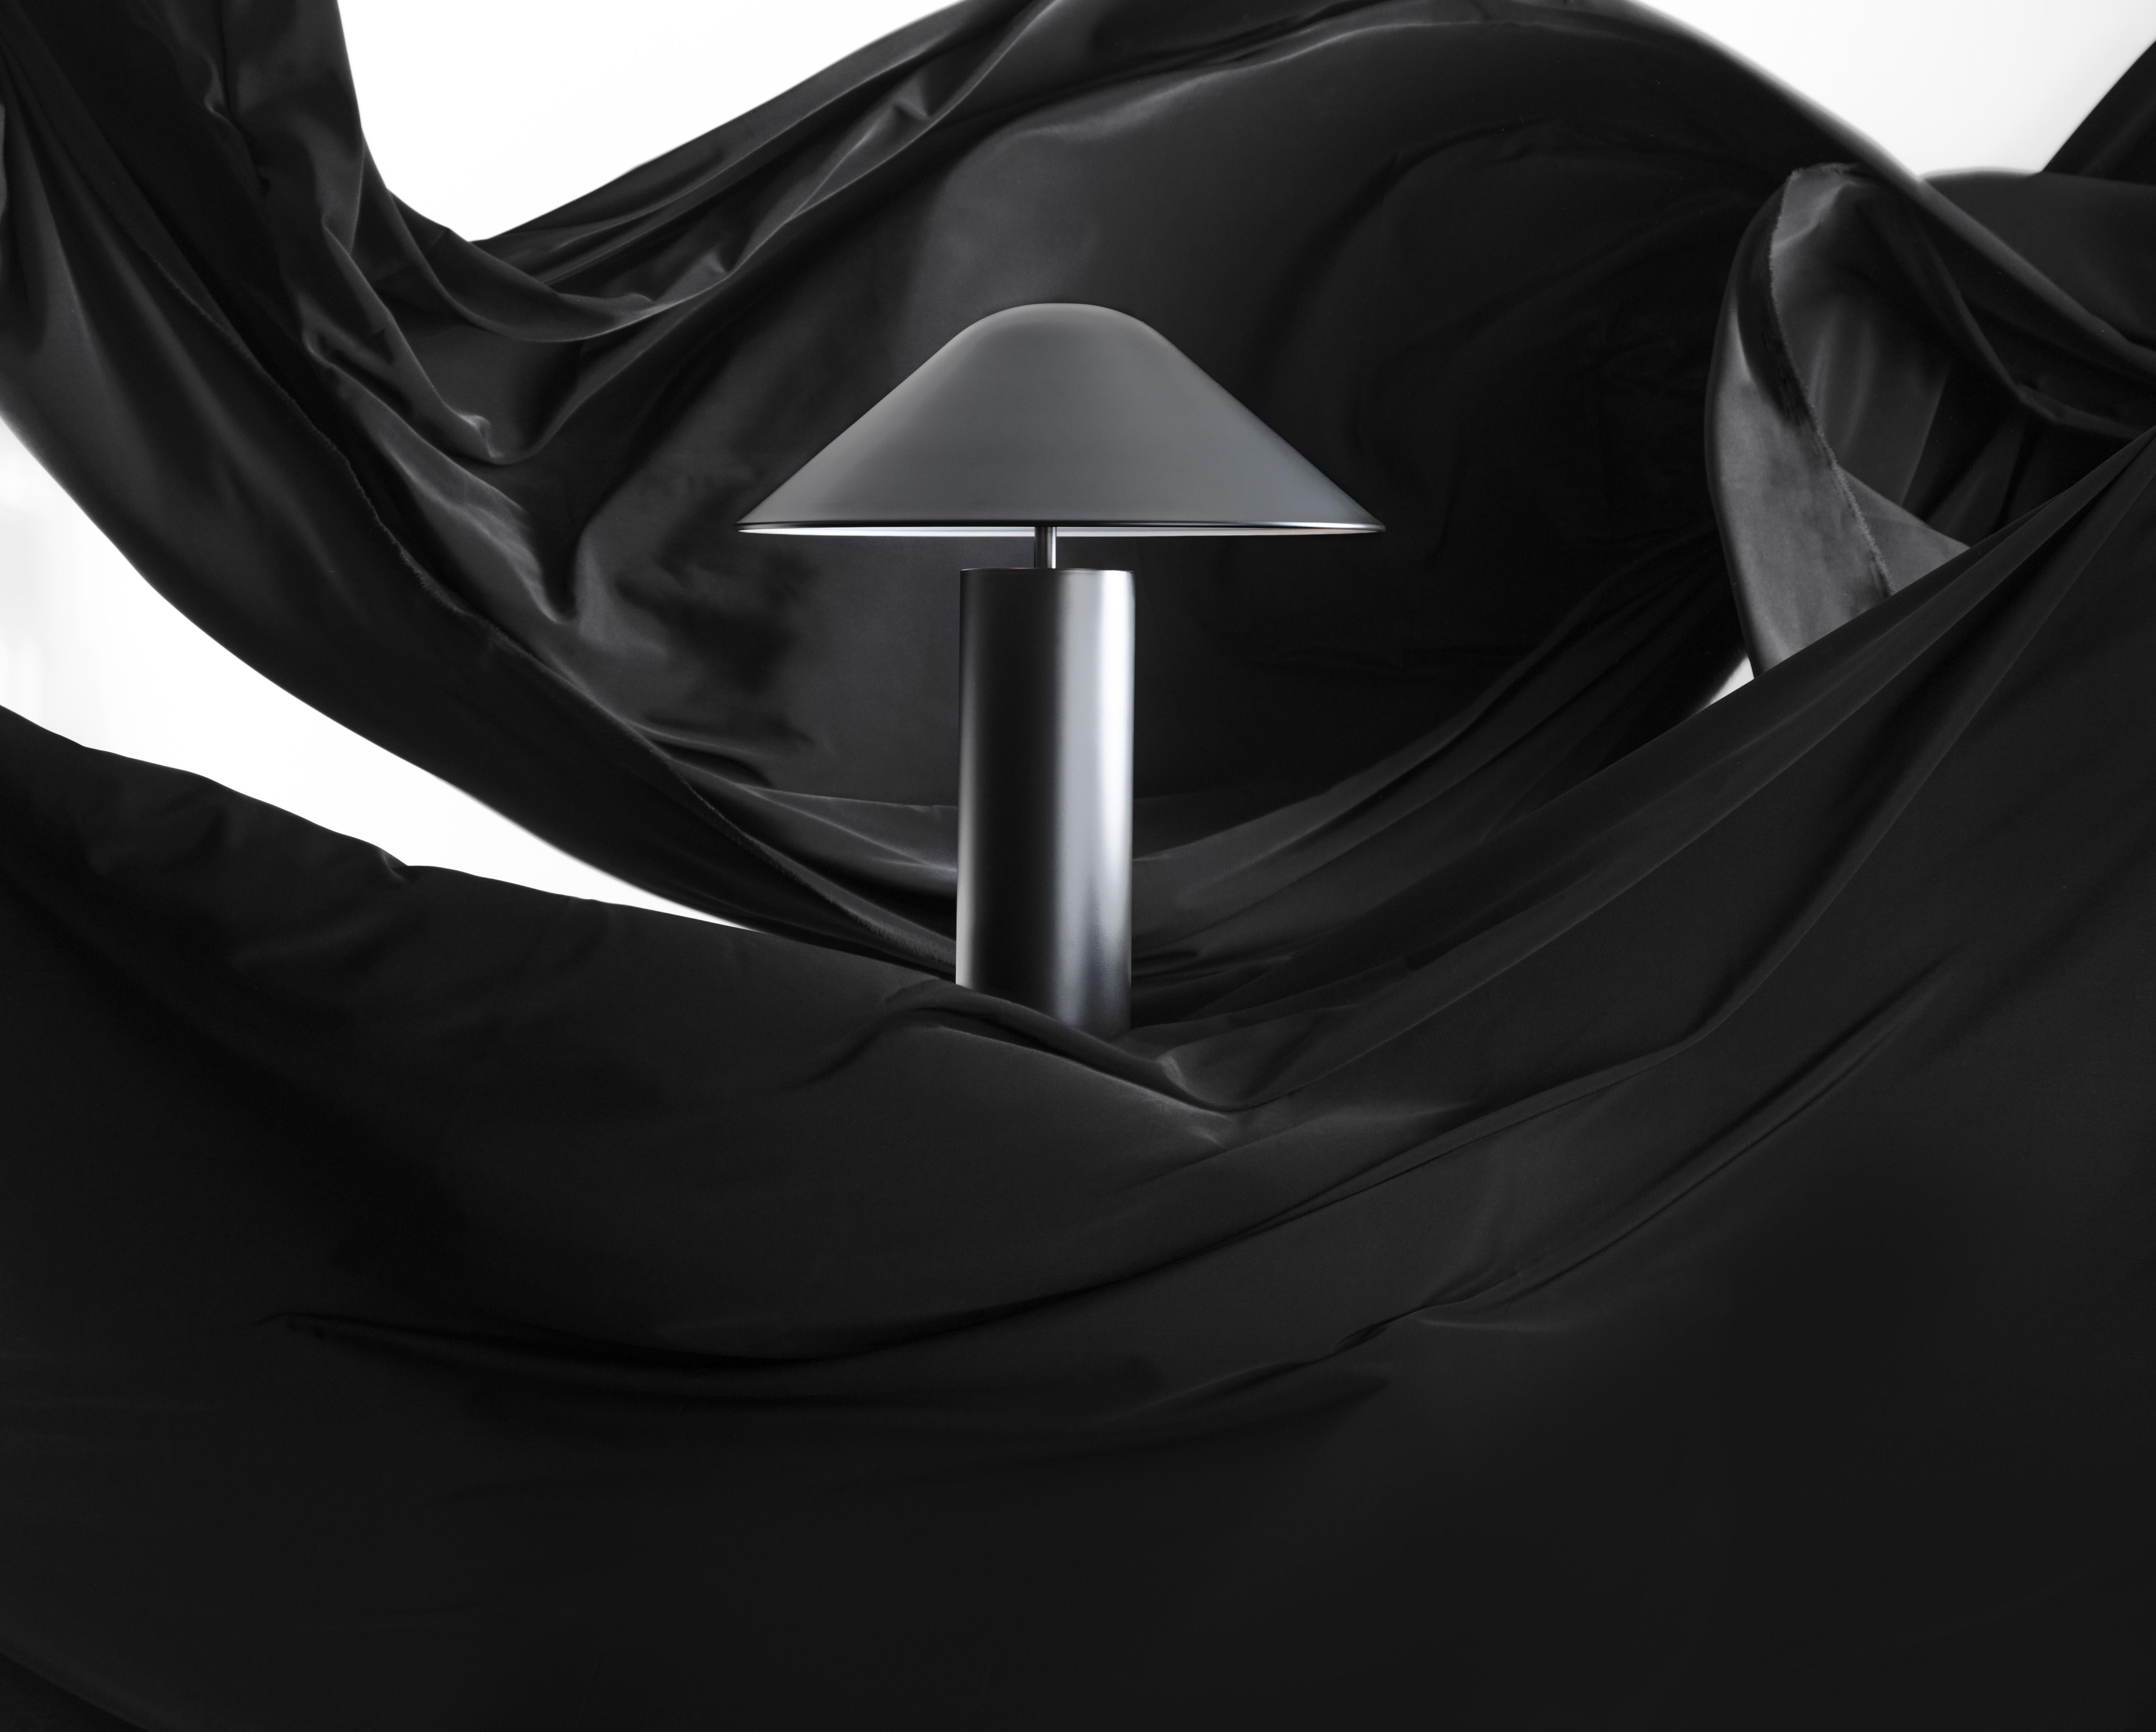 Damo simple table lamp not only crafts a sense of serenity, it also instills utmost vitality through its brightness, clarifying your innermost thoughts when needed.

Material:
Steel

Color:
Matt black / copper / chrome / white / champagne